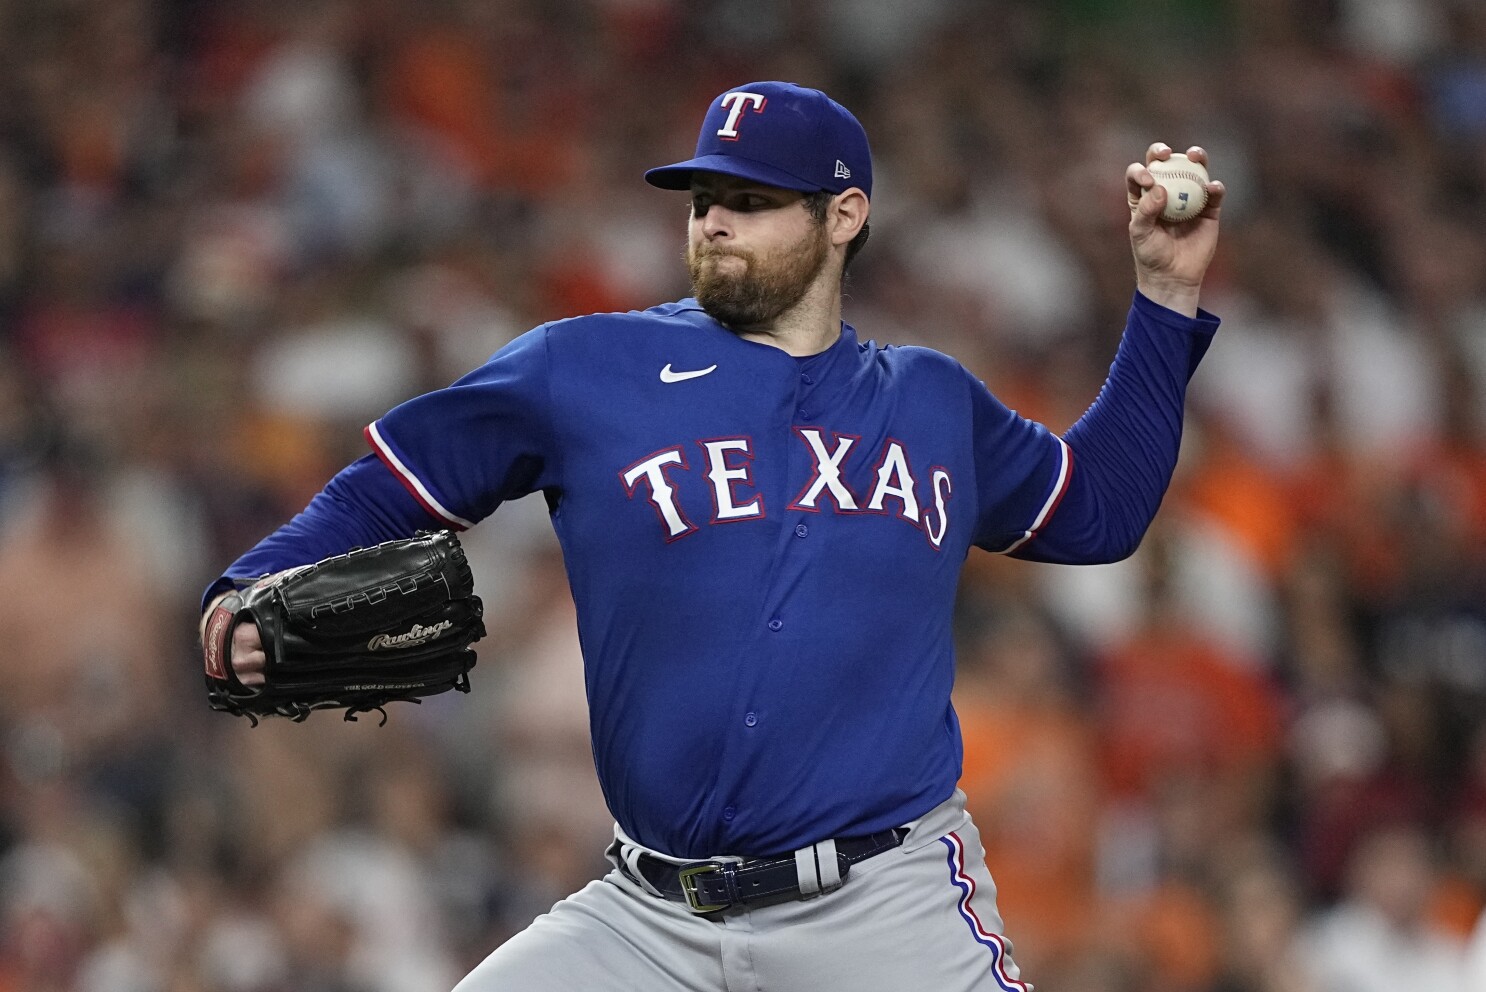 POLL: Will Texas Rangers win Game 3 tonight? Or will Houston